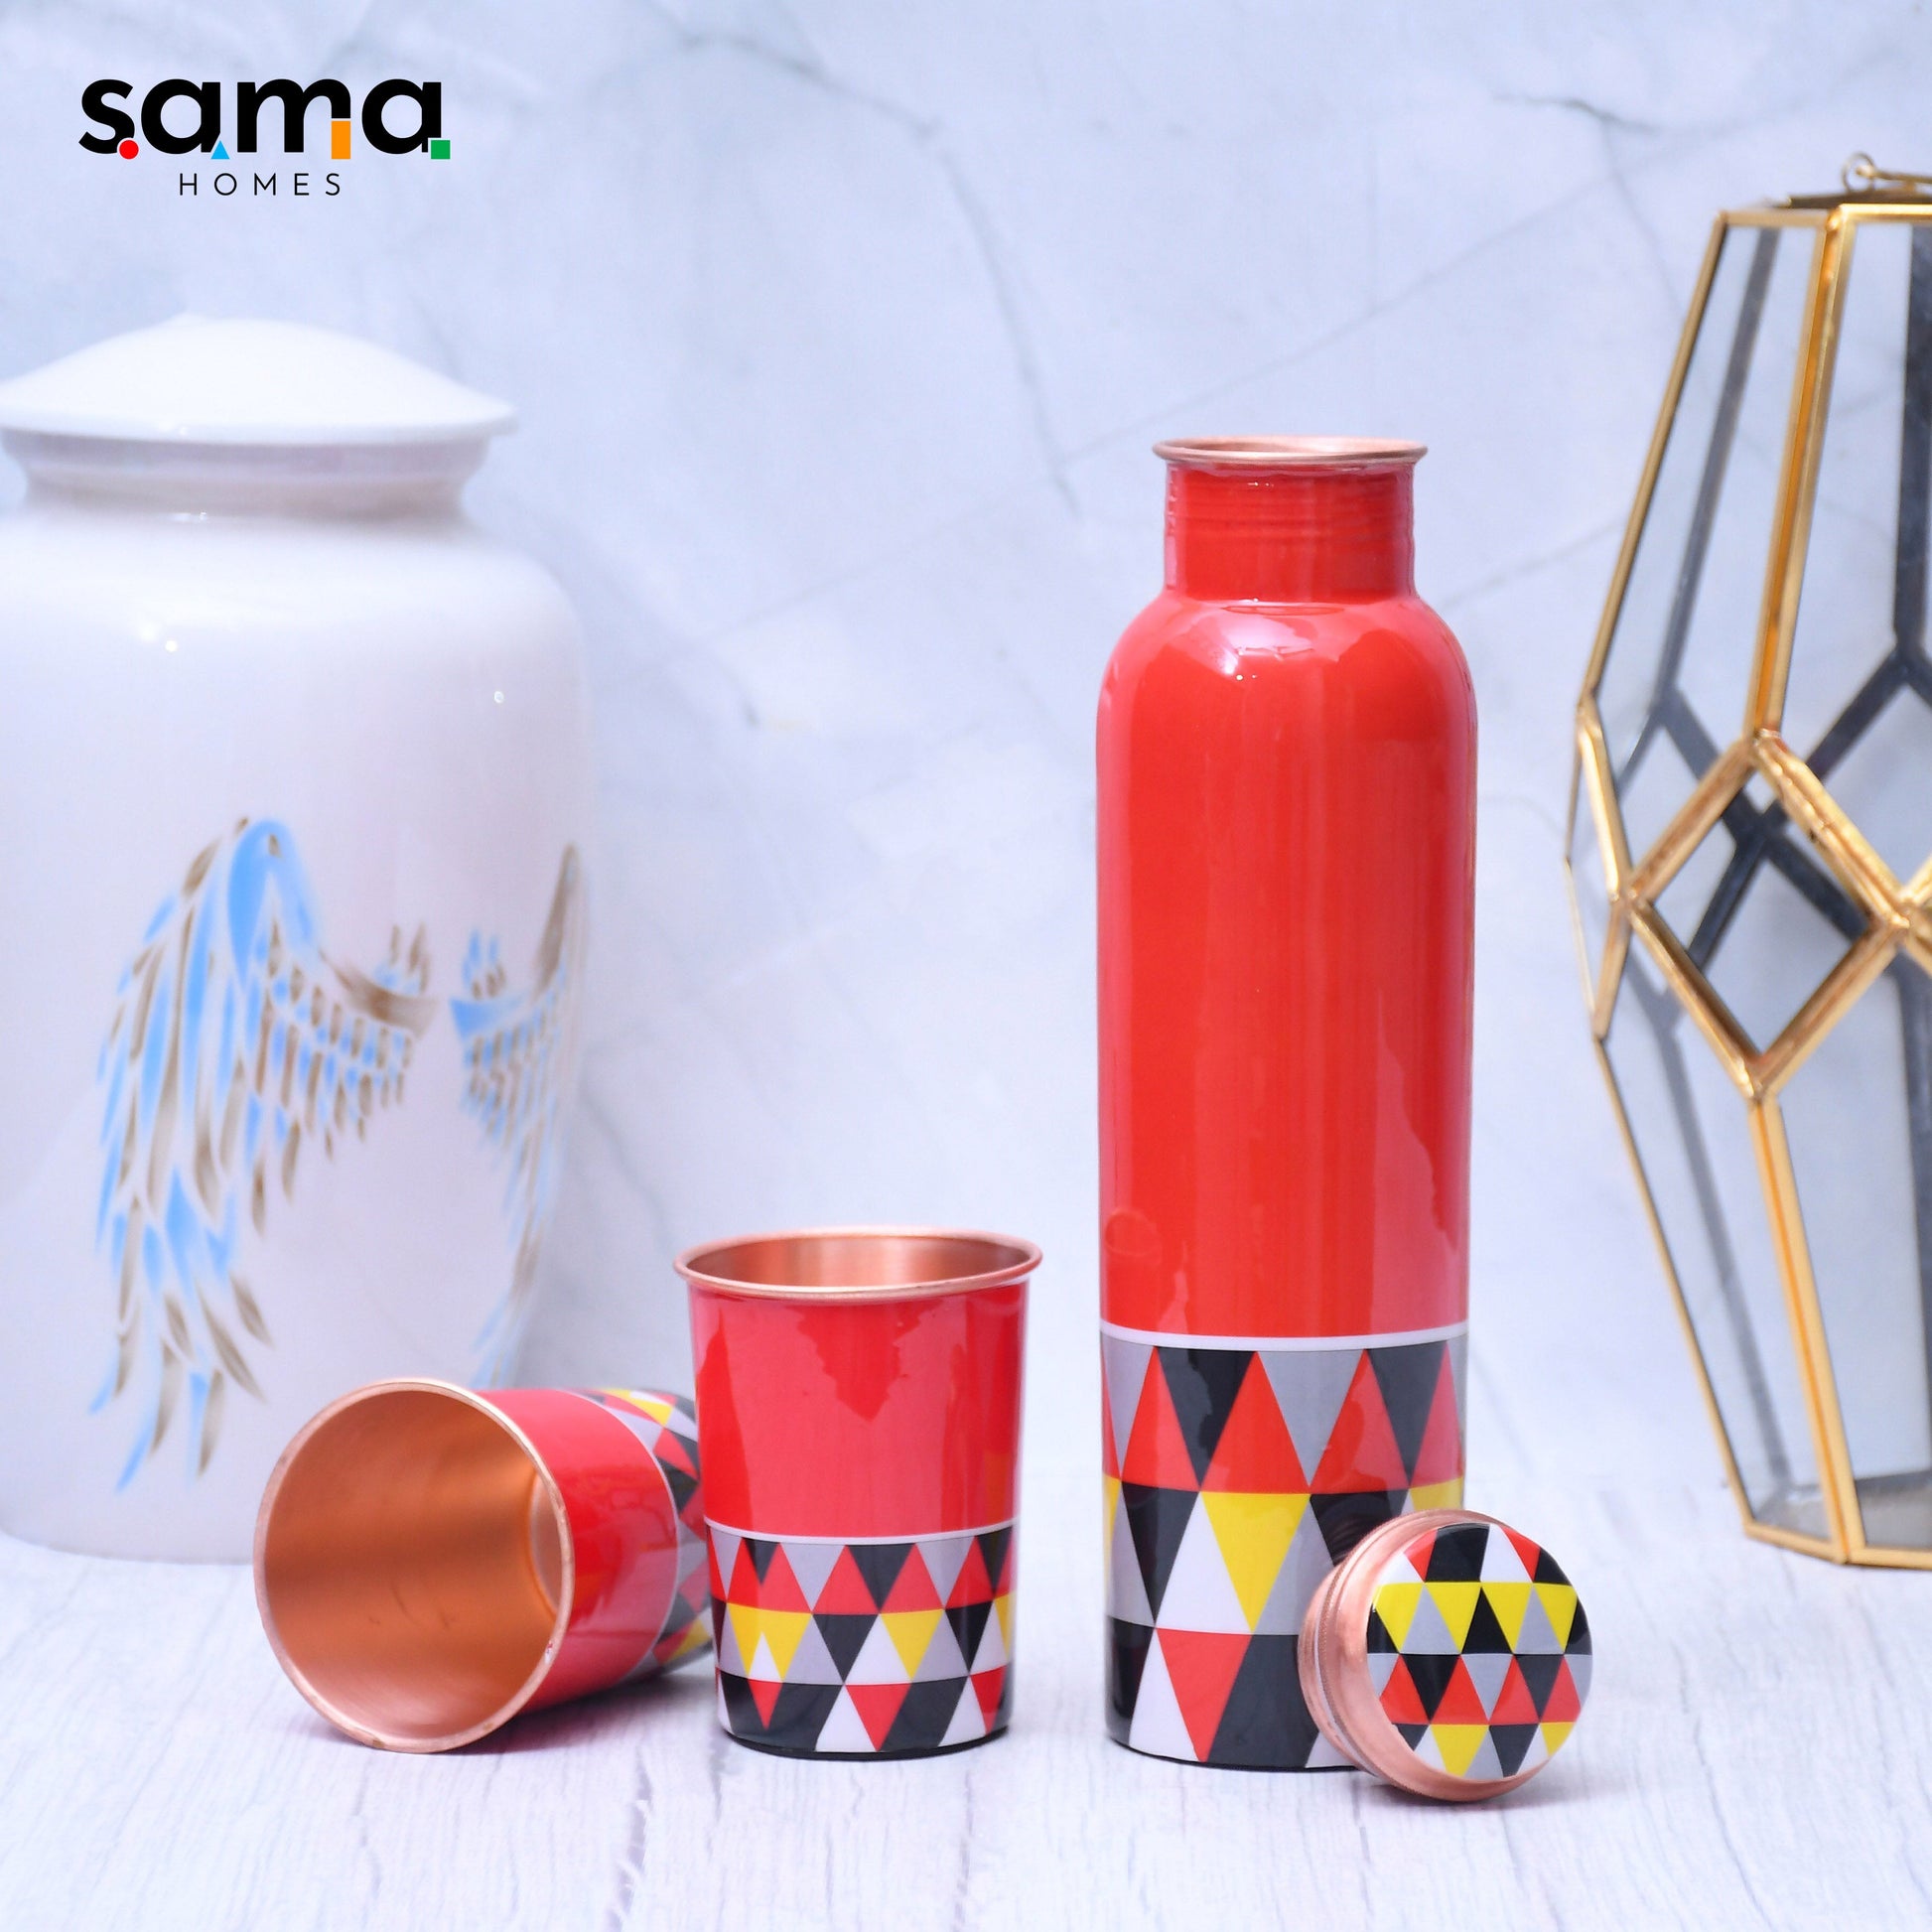 SAMA Homes - exclusive triangle design printed copper bottle with 2 glasses tumbler set of 3